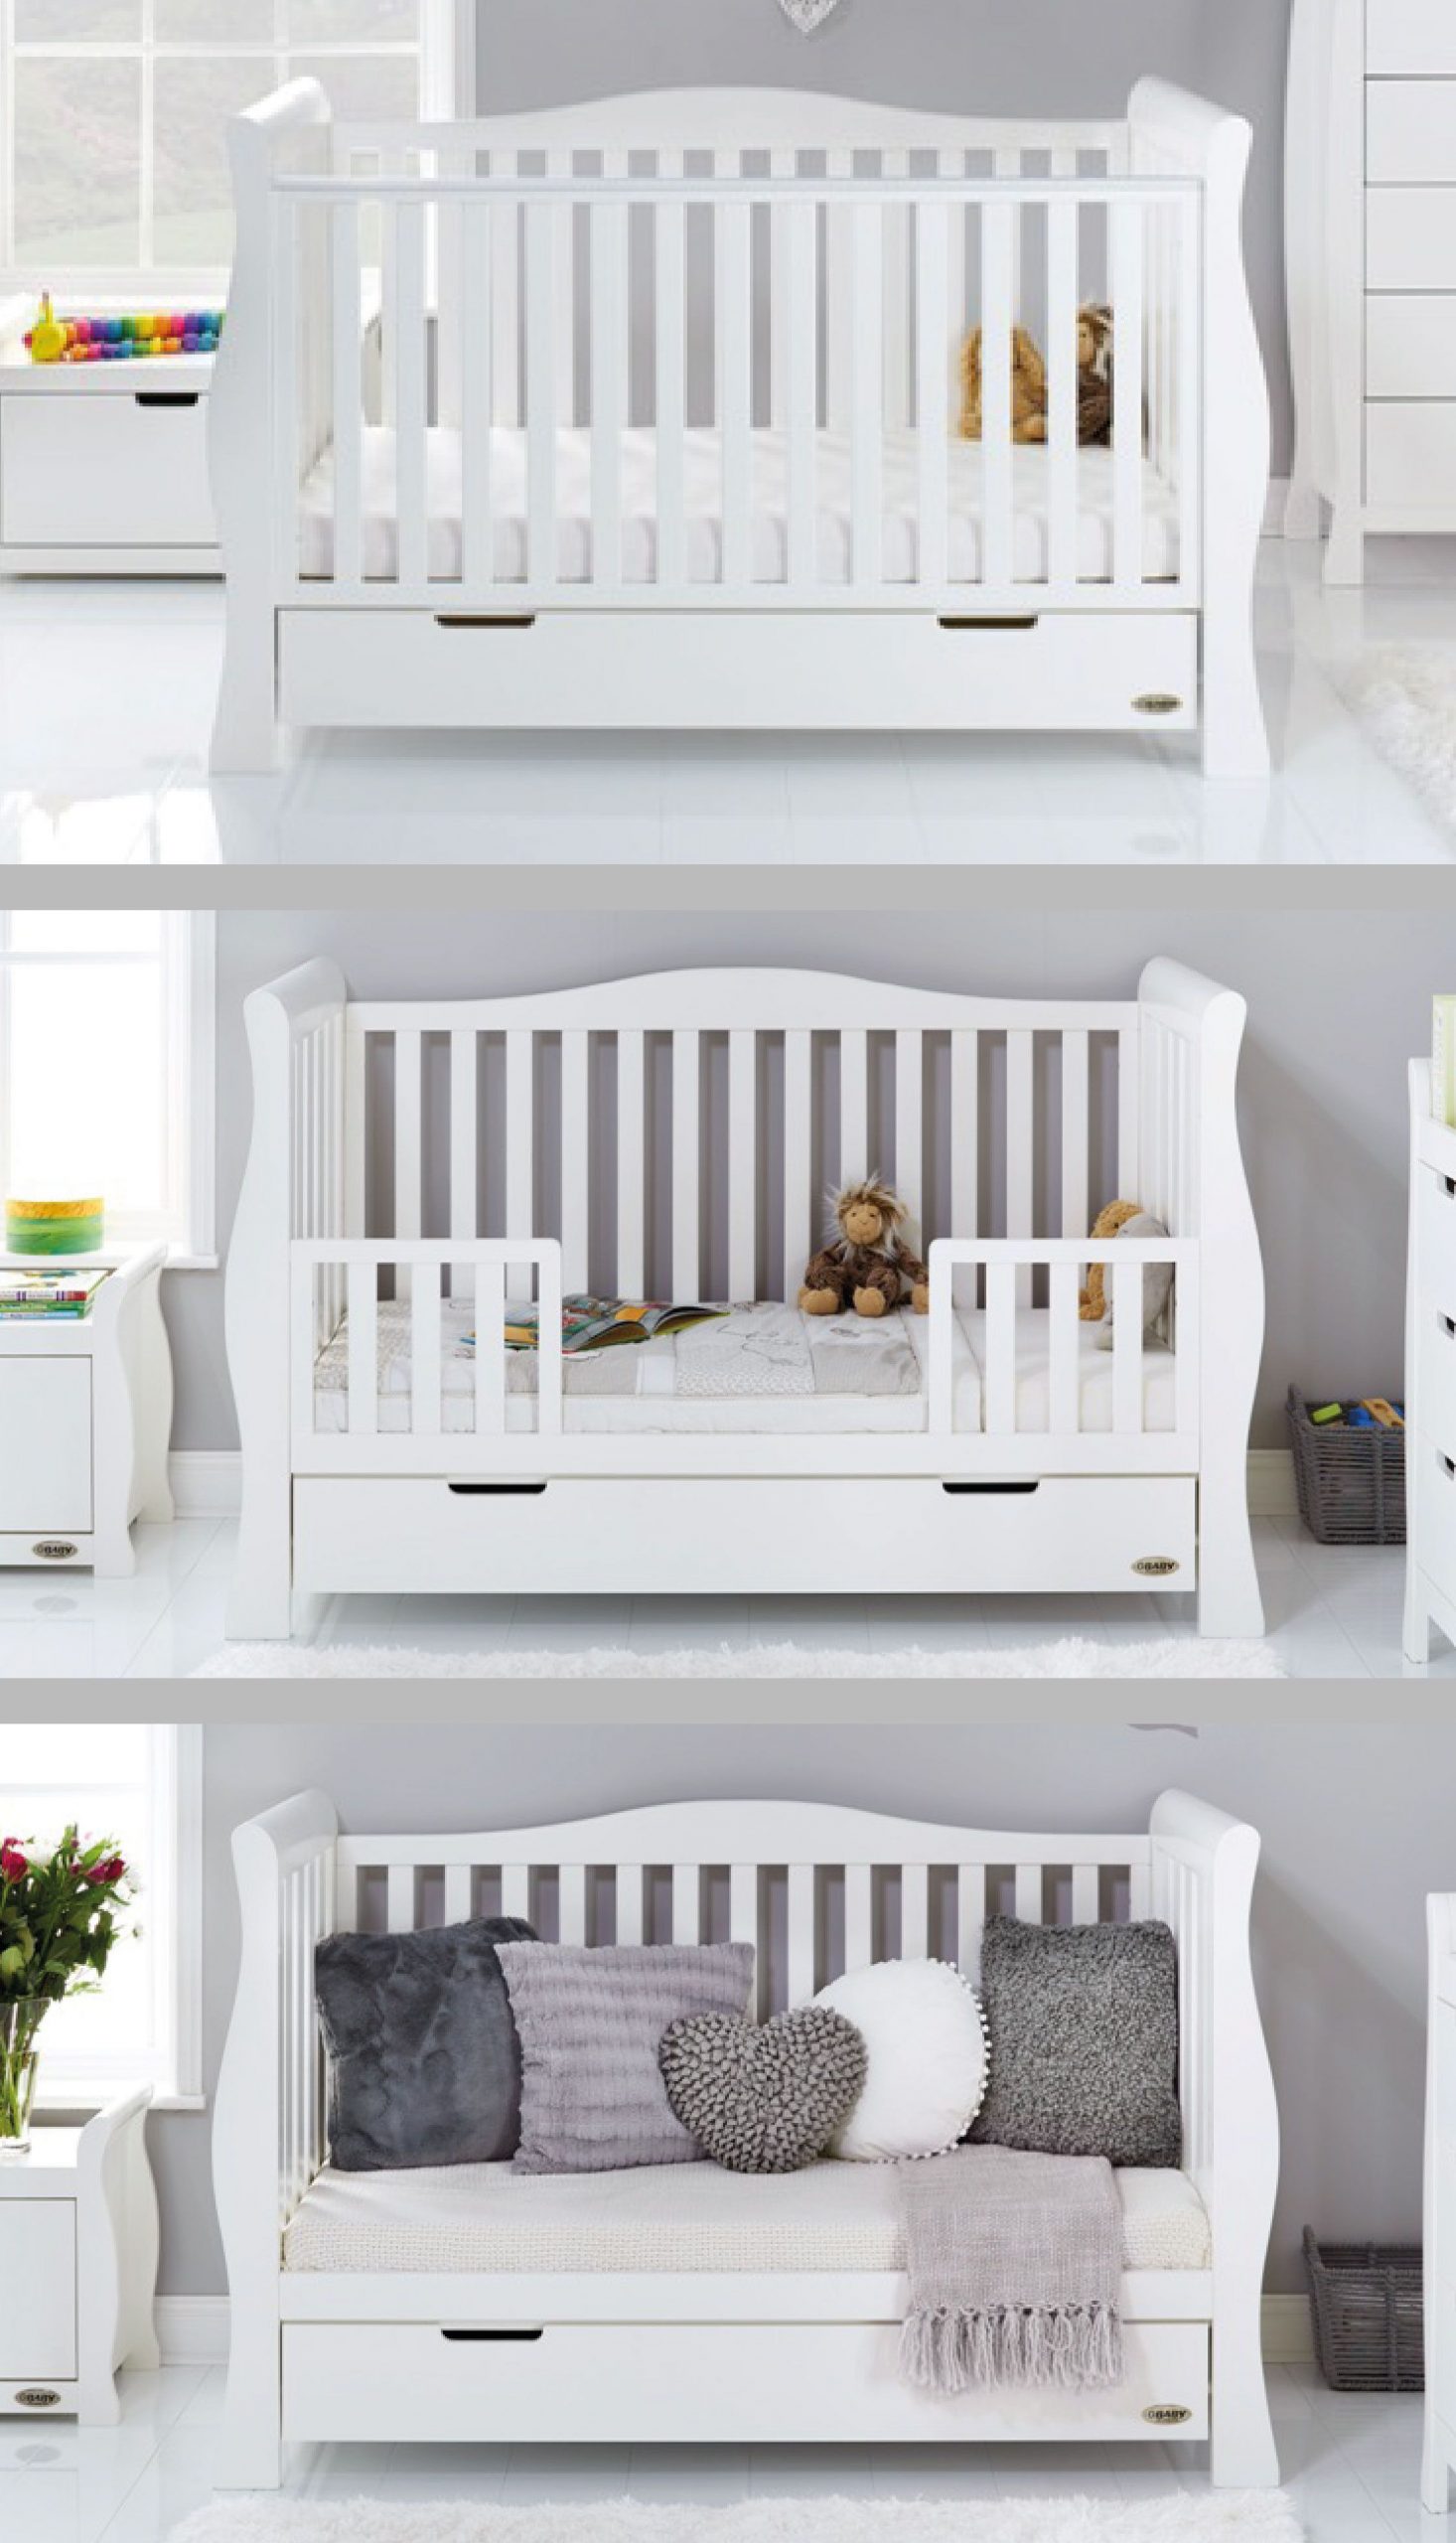 Obaby Stamford Luxe Sleigh Cot Bed - White  . . . #baby #nursery #babynursery #c...